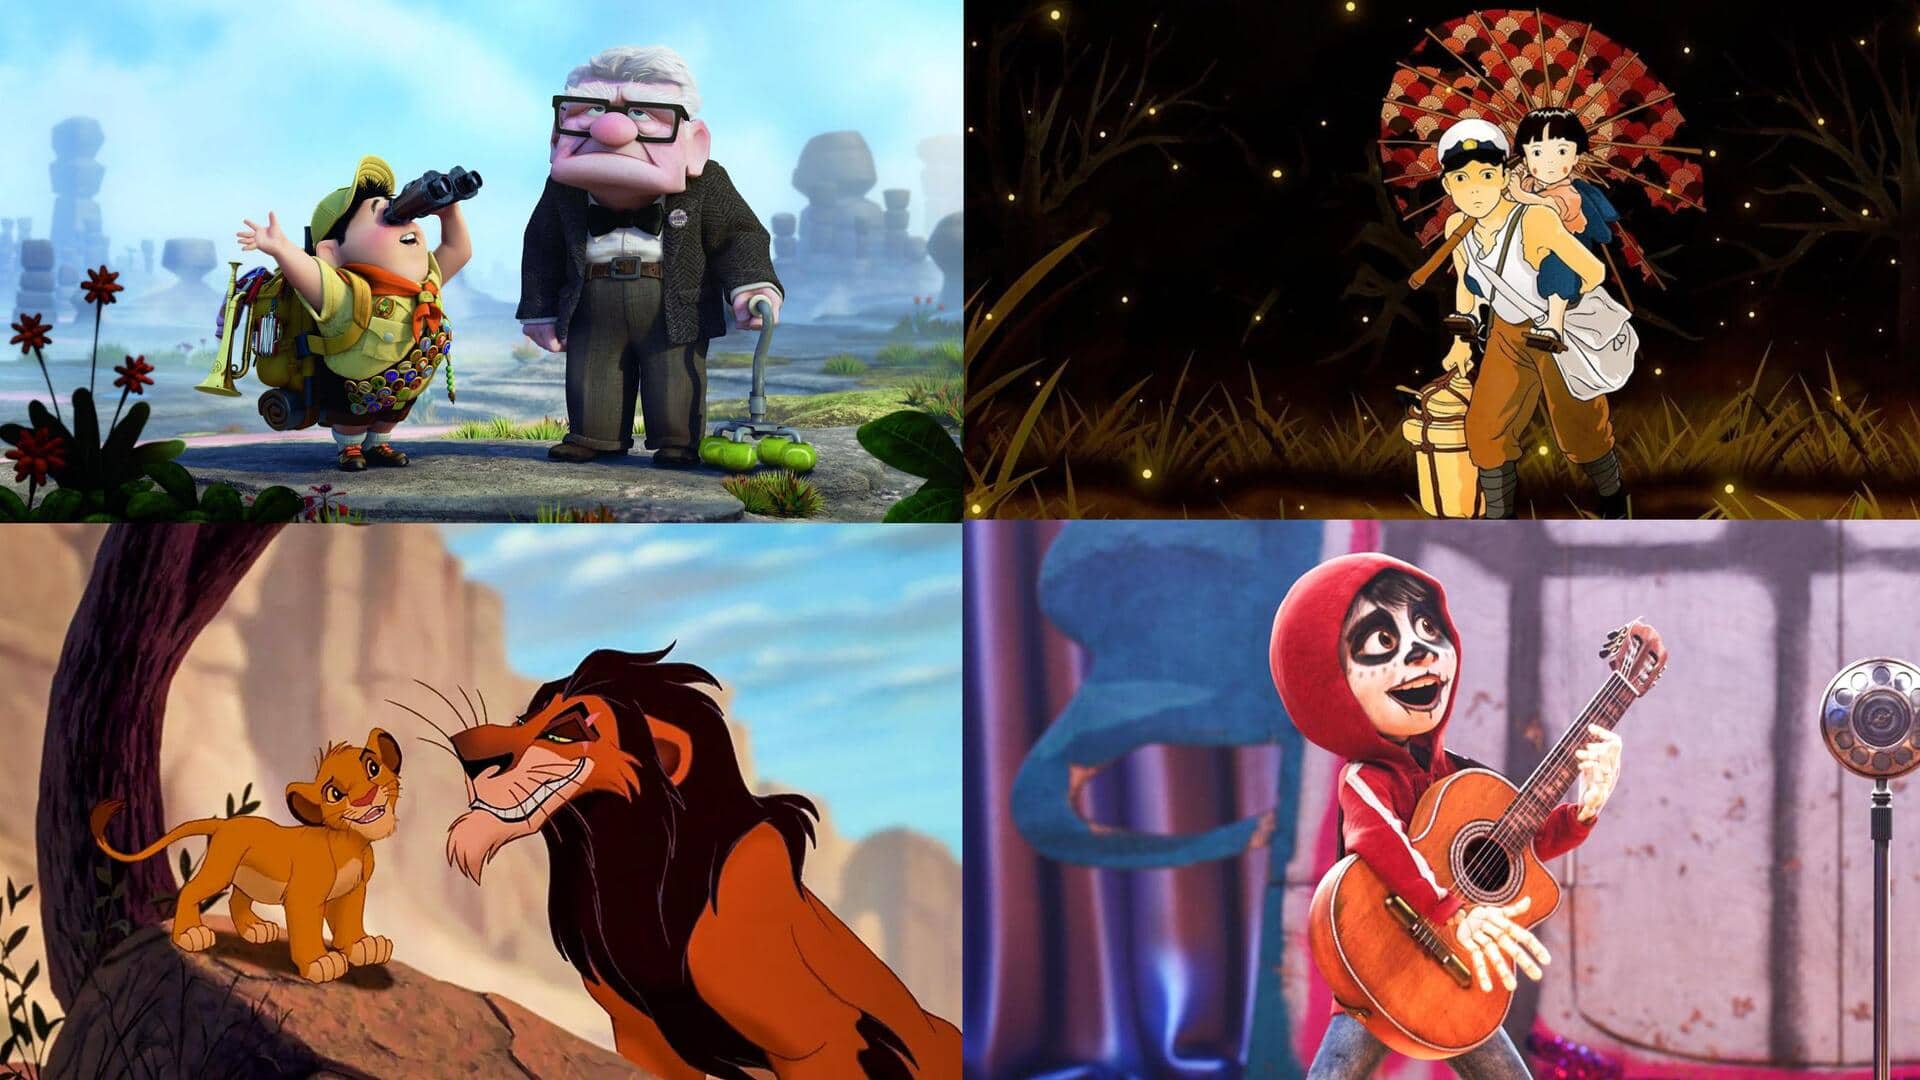 'Grave of Fireflies' to 'Coco': 5 emotionally charged animated movies